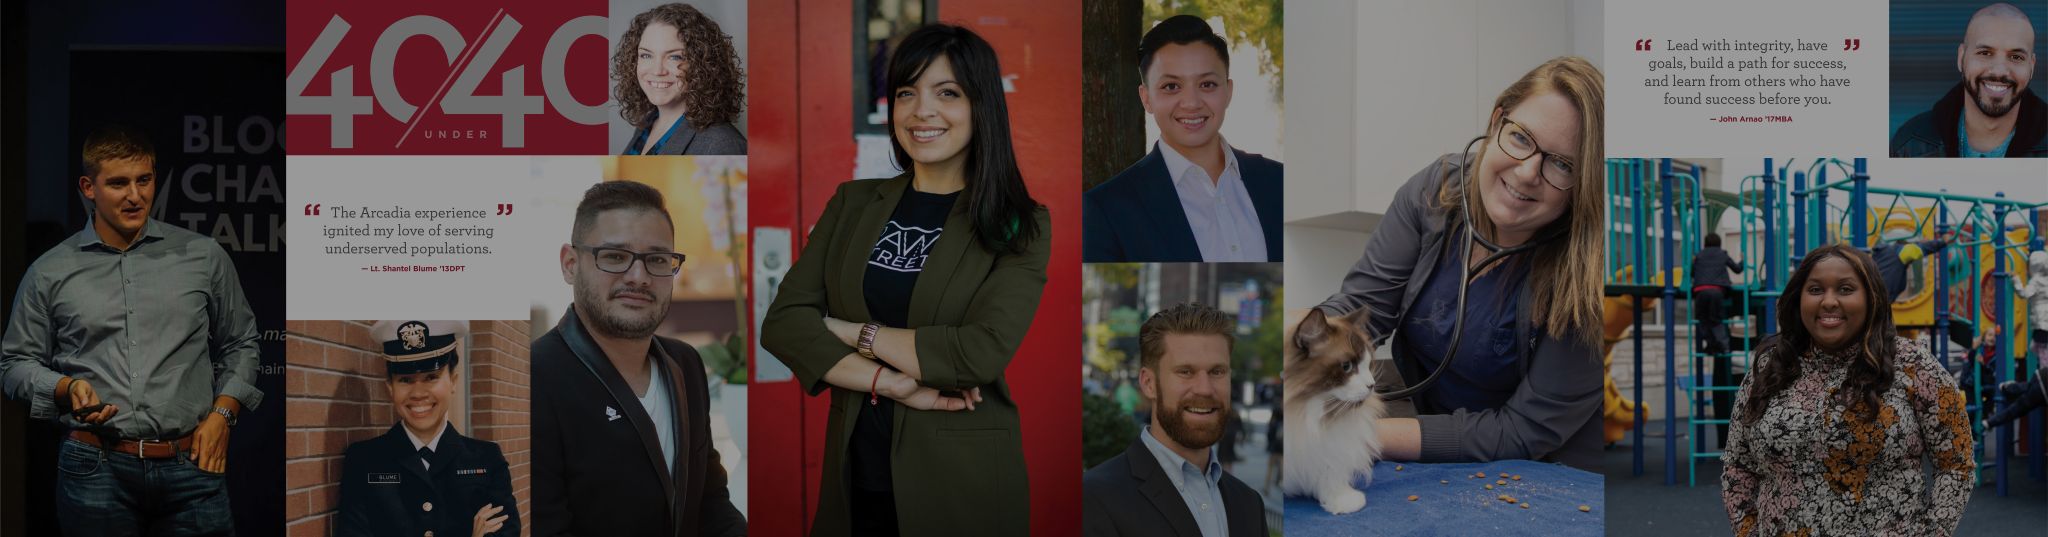 A collage of the 40 under 40 with the quotes "The Arcadia experience ignited my love of serving underserved populations." and "Lead with integrity, have goals, build a path for success, and learn from others who have found success before you."